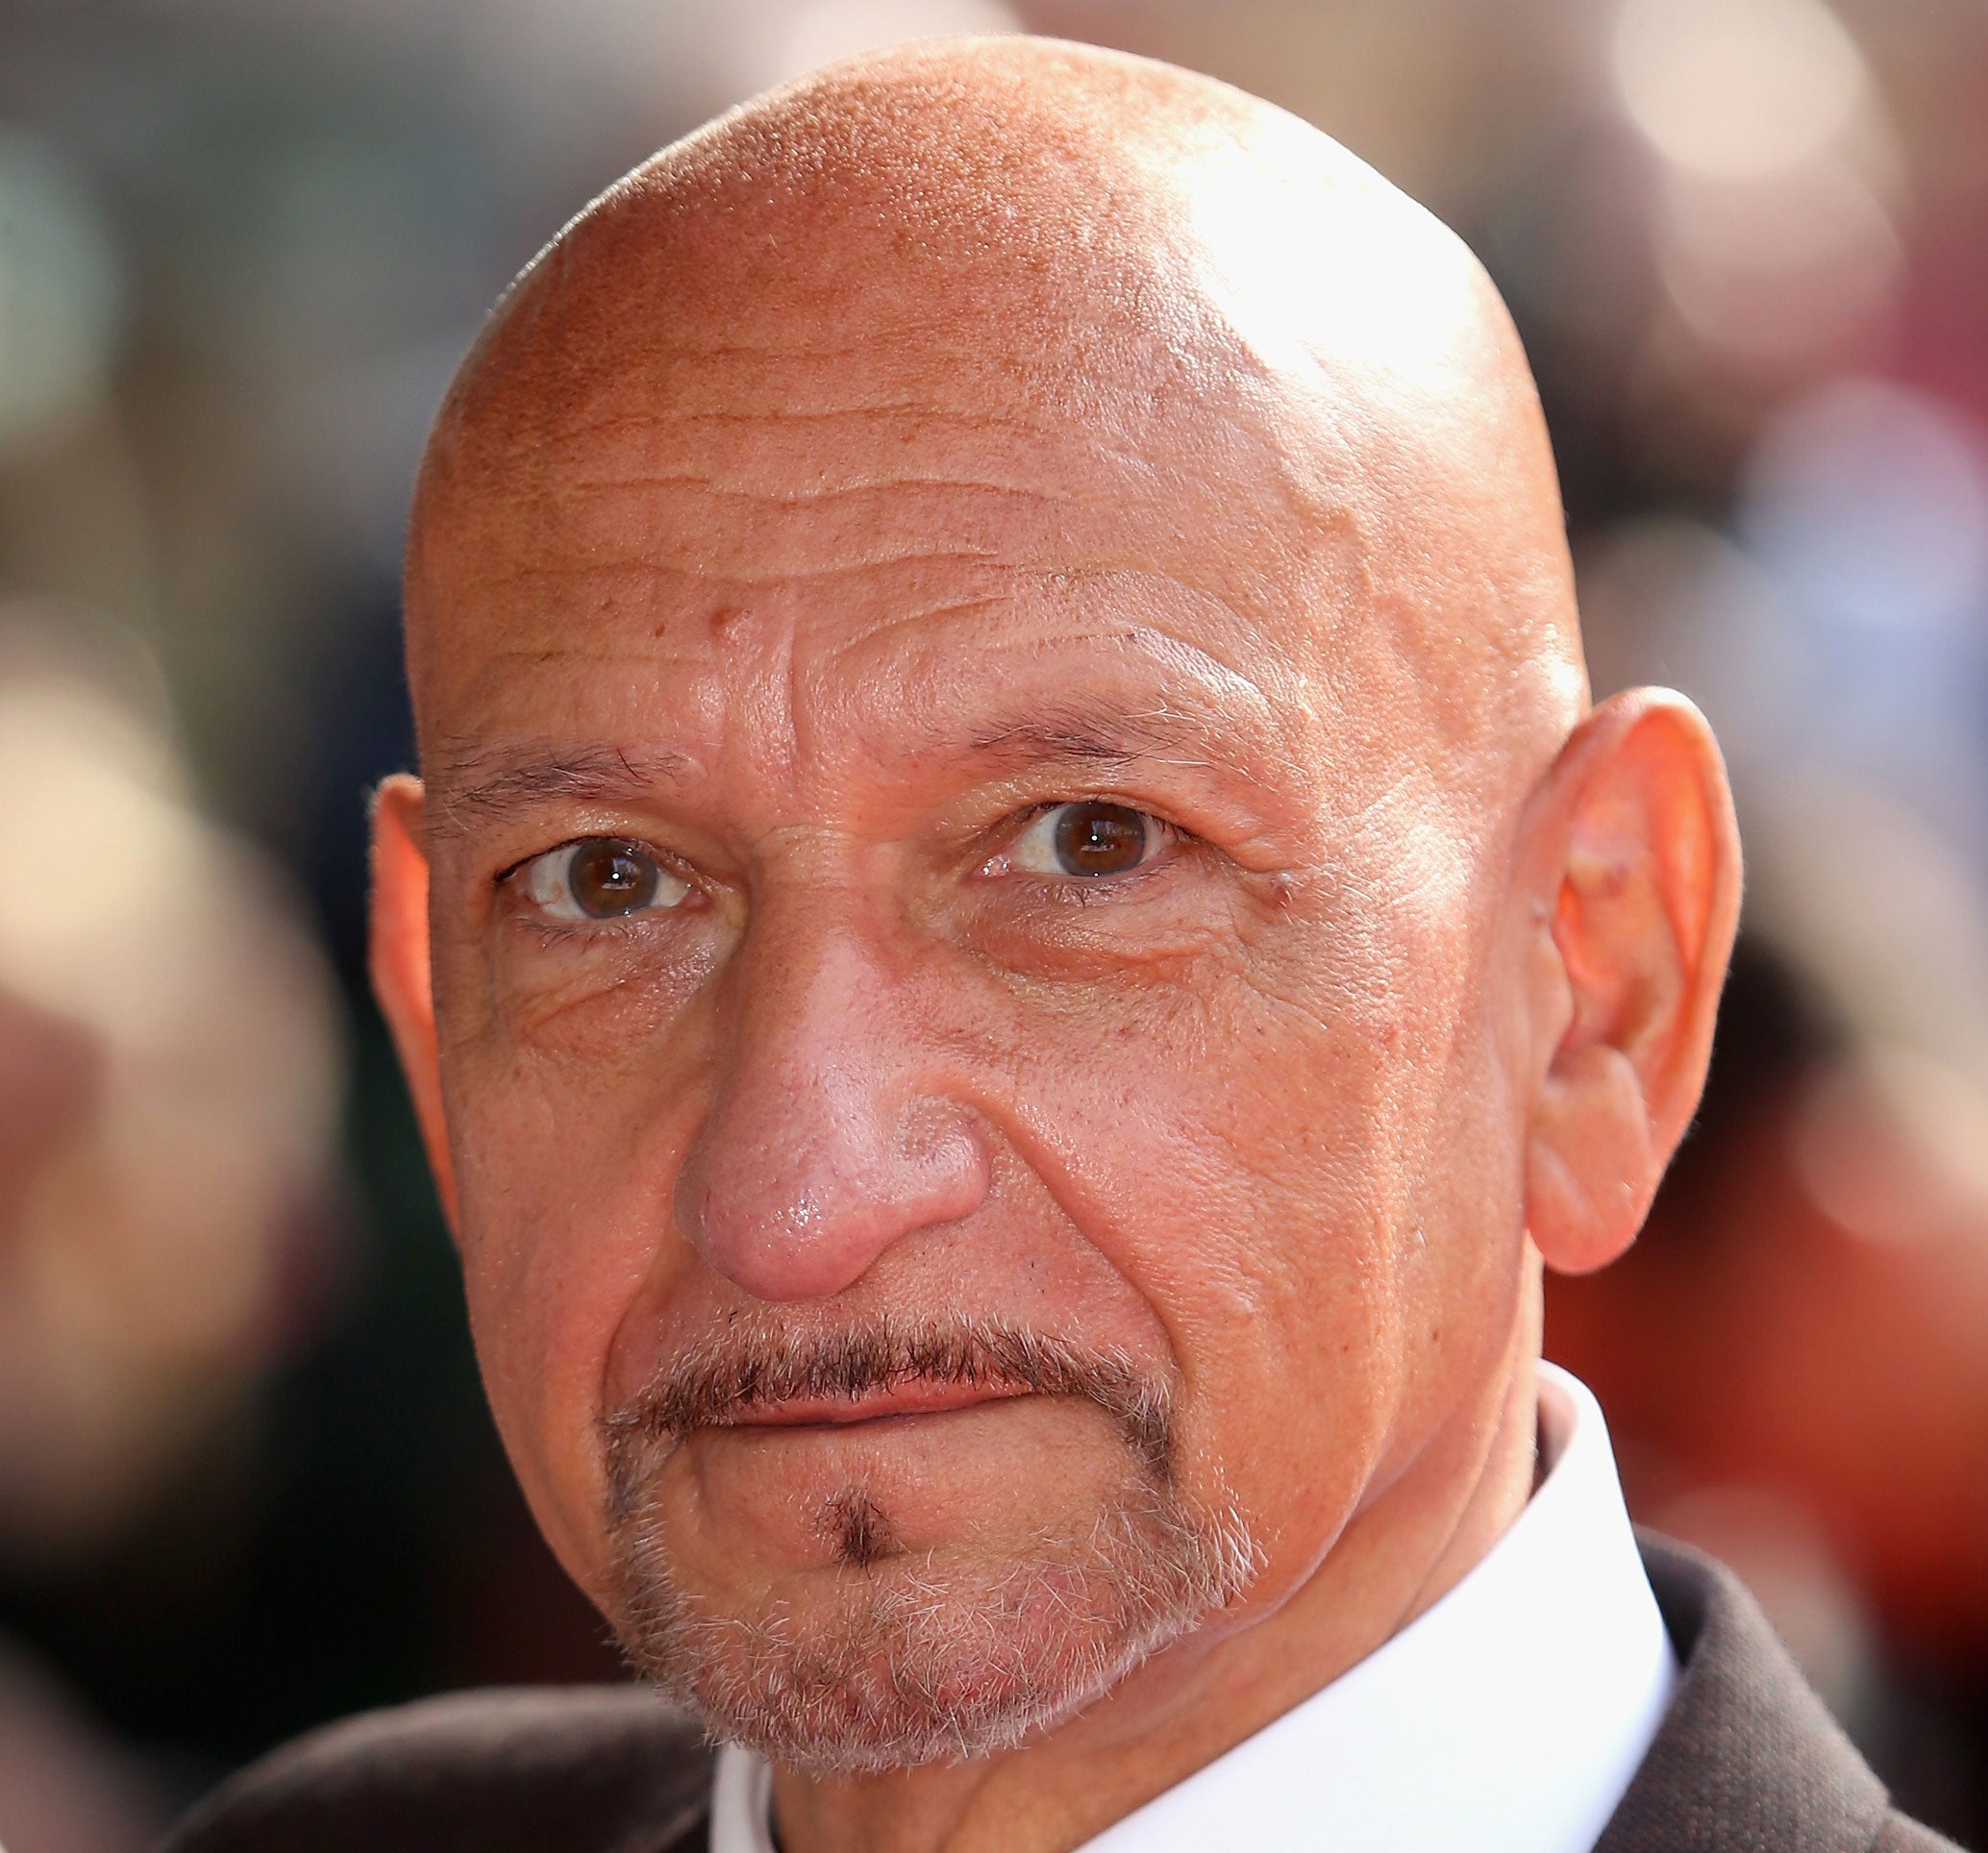 Ben Kingsley attends the Prince's Trust & Samsung Celebrate Success awards at Odeon Leicester Square on 12 March, 2014, in London, England